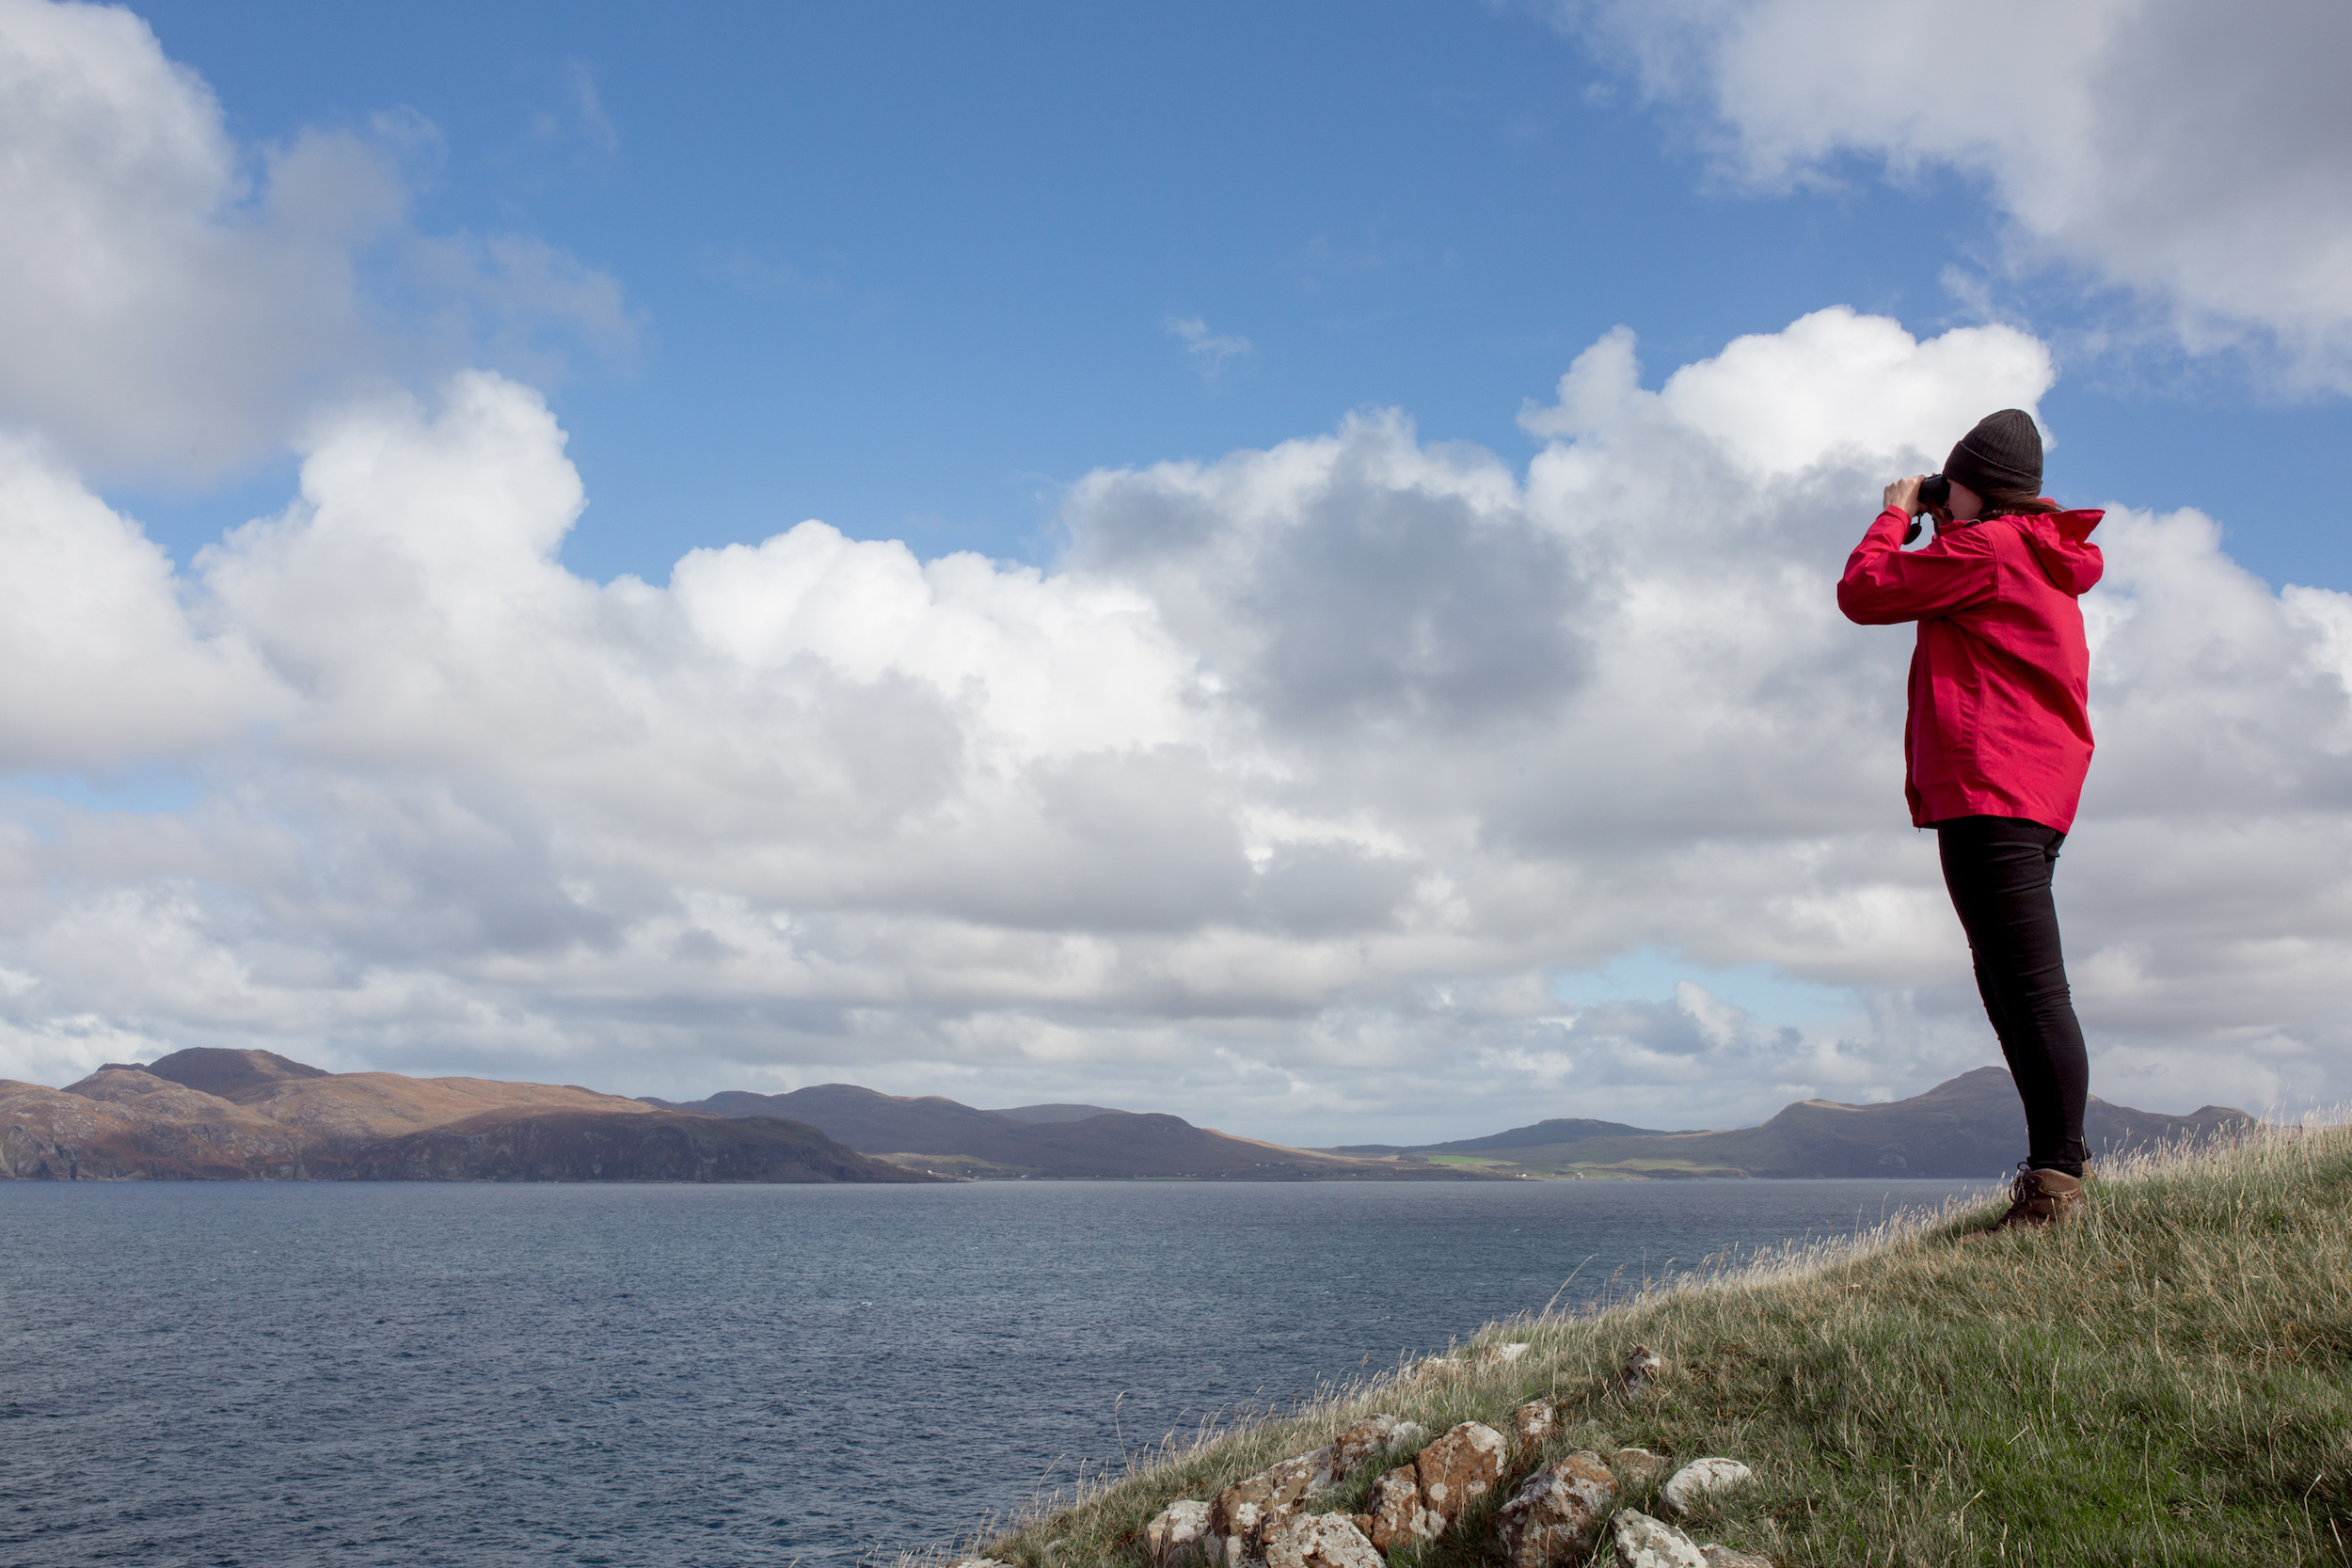 Hebridean Whale and Dolphin Trust Director Alison Lomax looks out for whales © Lucy Hunter